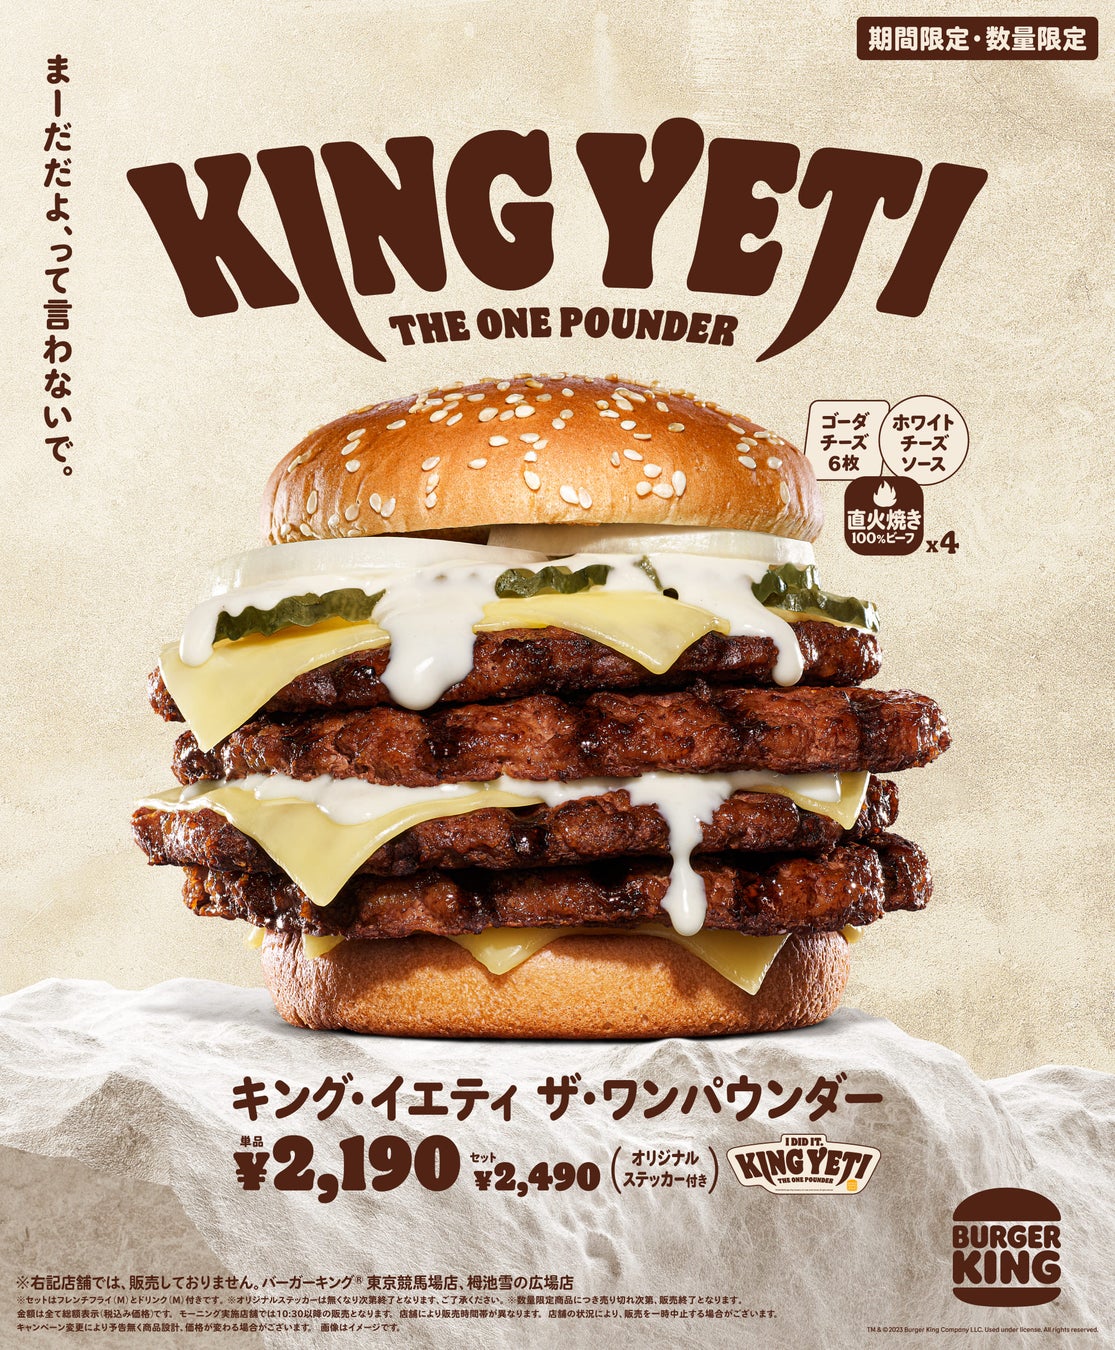 Burger King Japan unleashes King Yeti the One Pounder and all of 